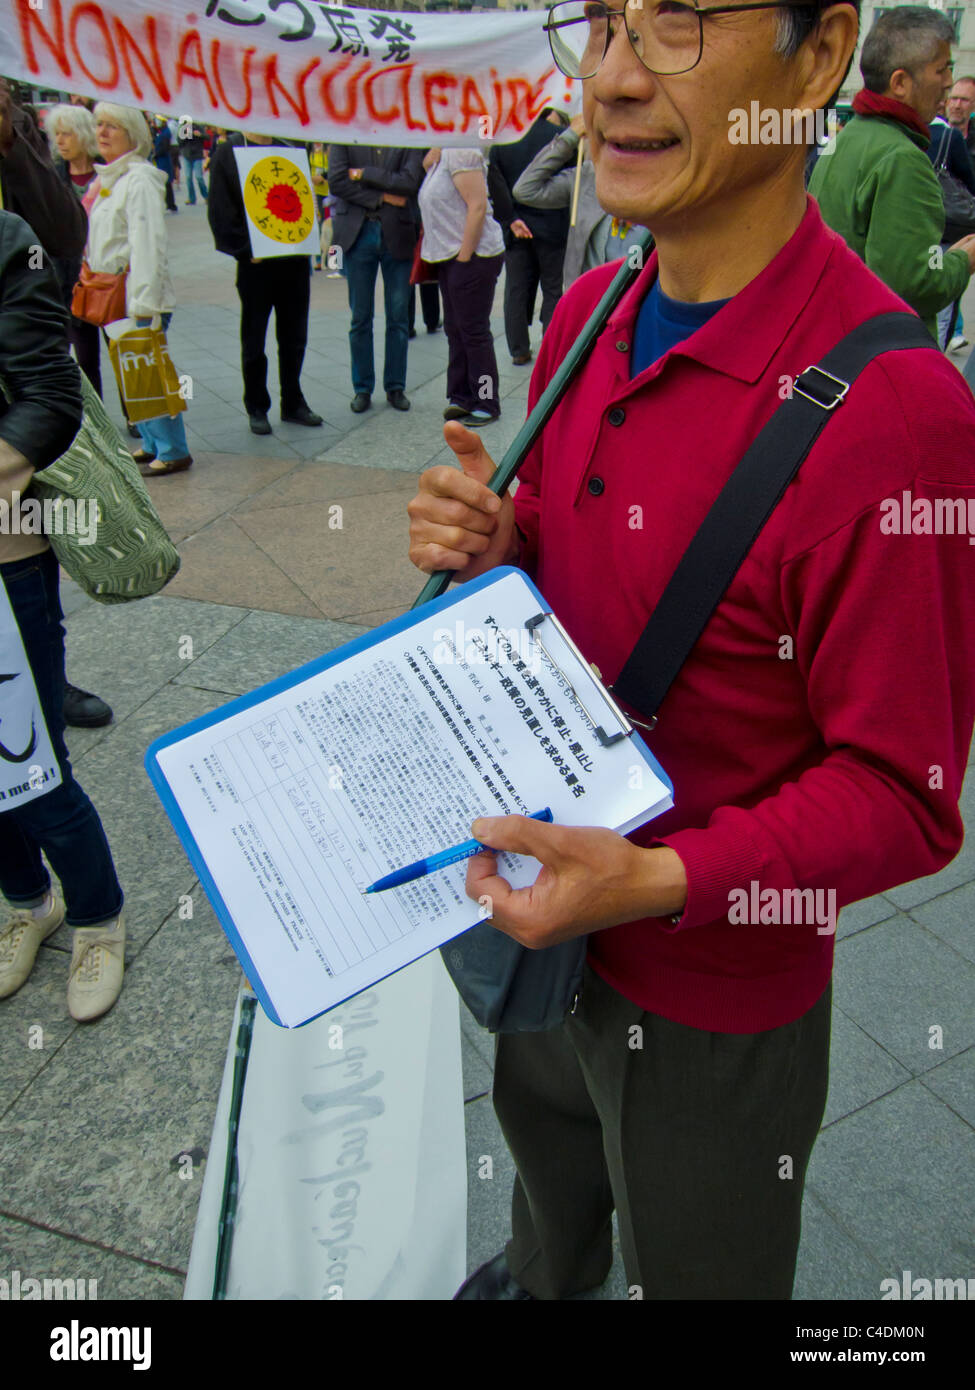 Paris, France, French Demonstration Against Nuclear Power, Japanese Man Getting Signatures for Petition. volunteer NGO work Stock Photo